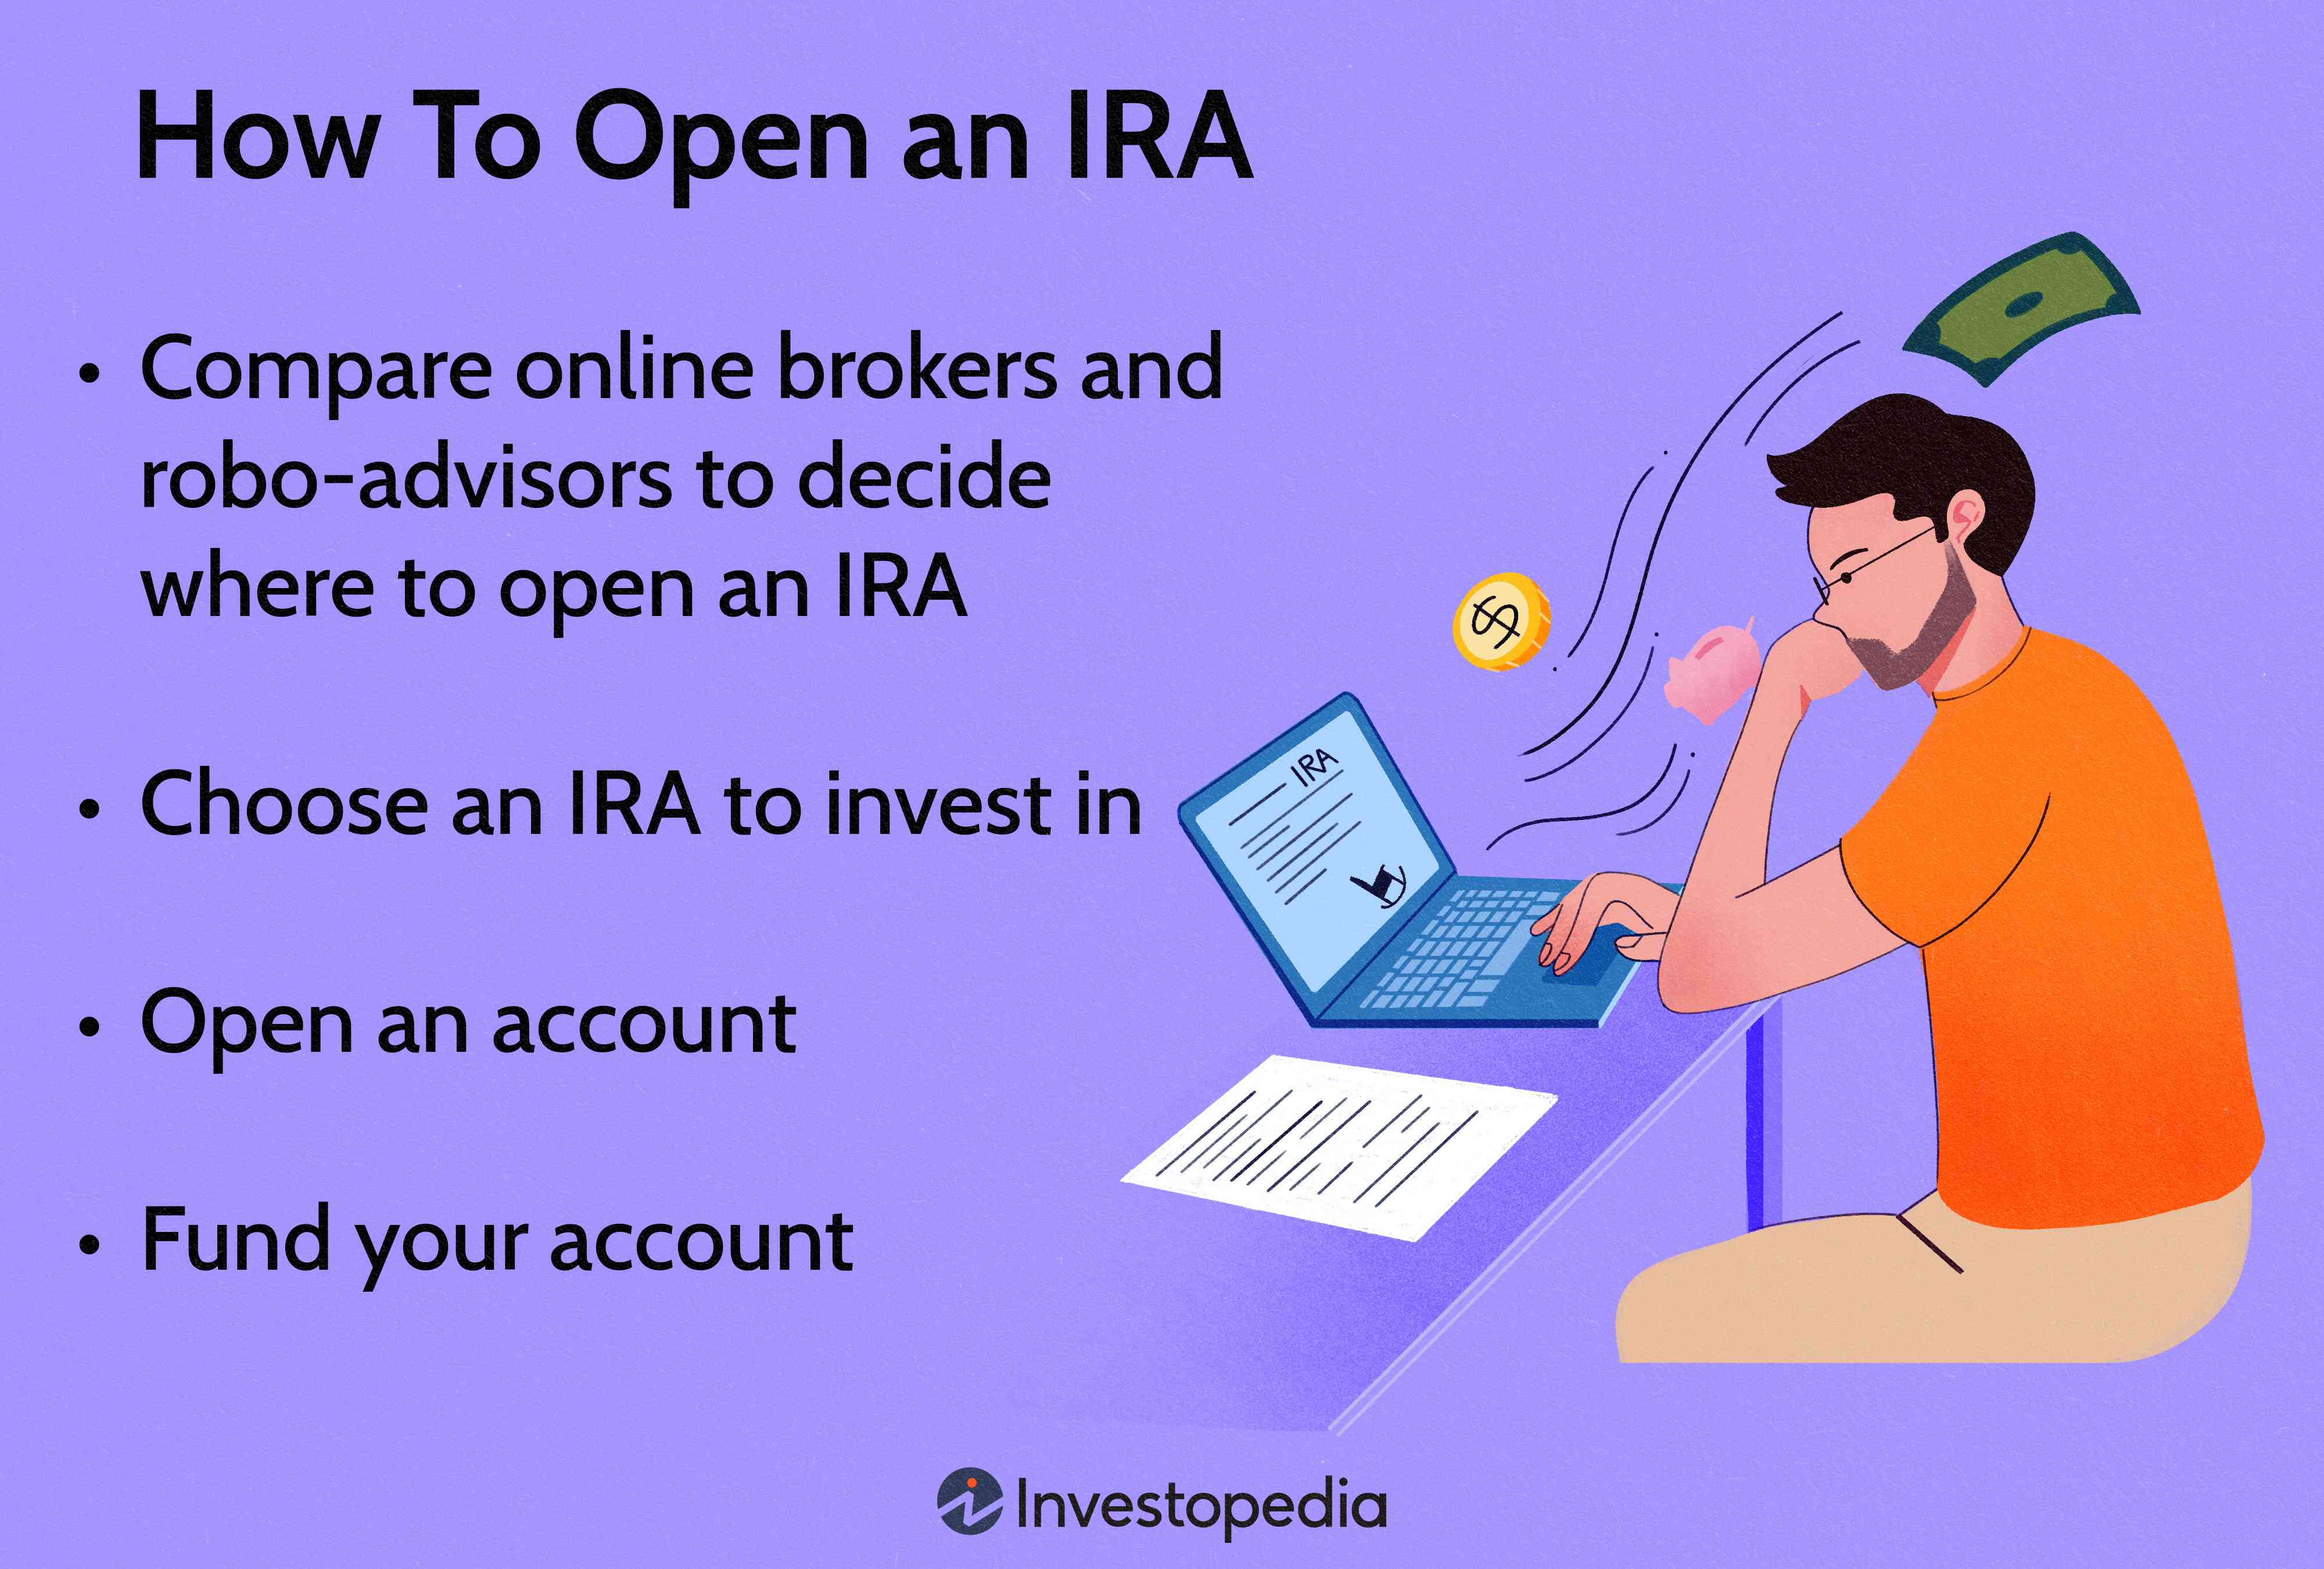 How To Open an IRA